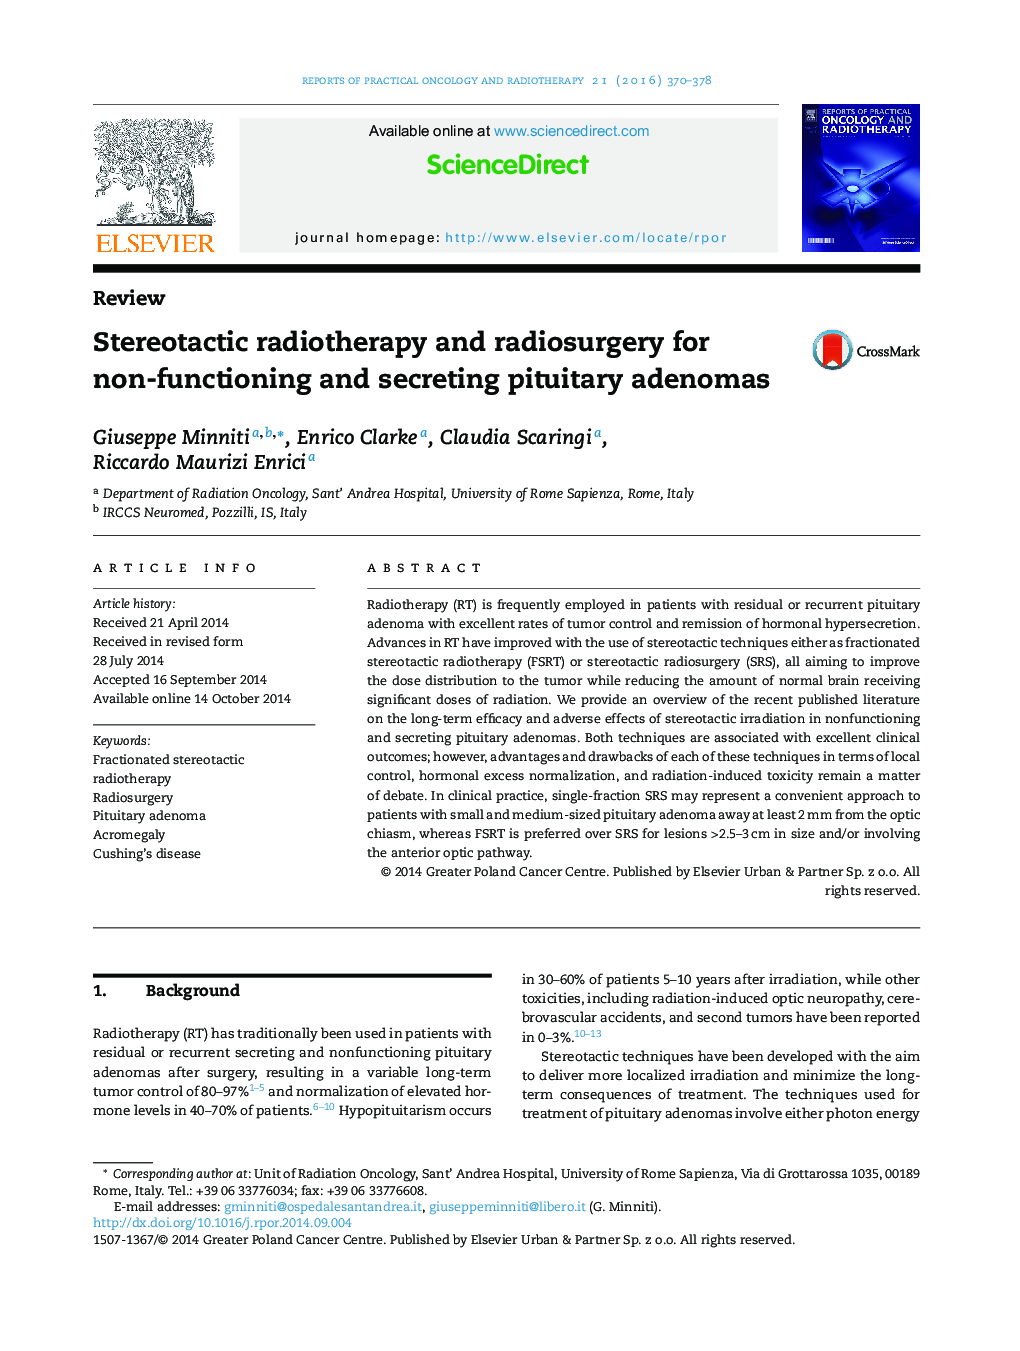 Stereotactic radiotherapy and radiosurgery for non-functioning and secreting pituitary adenomas